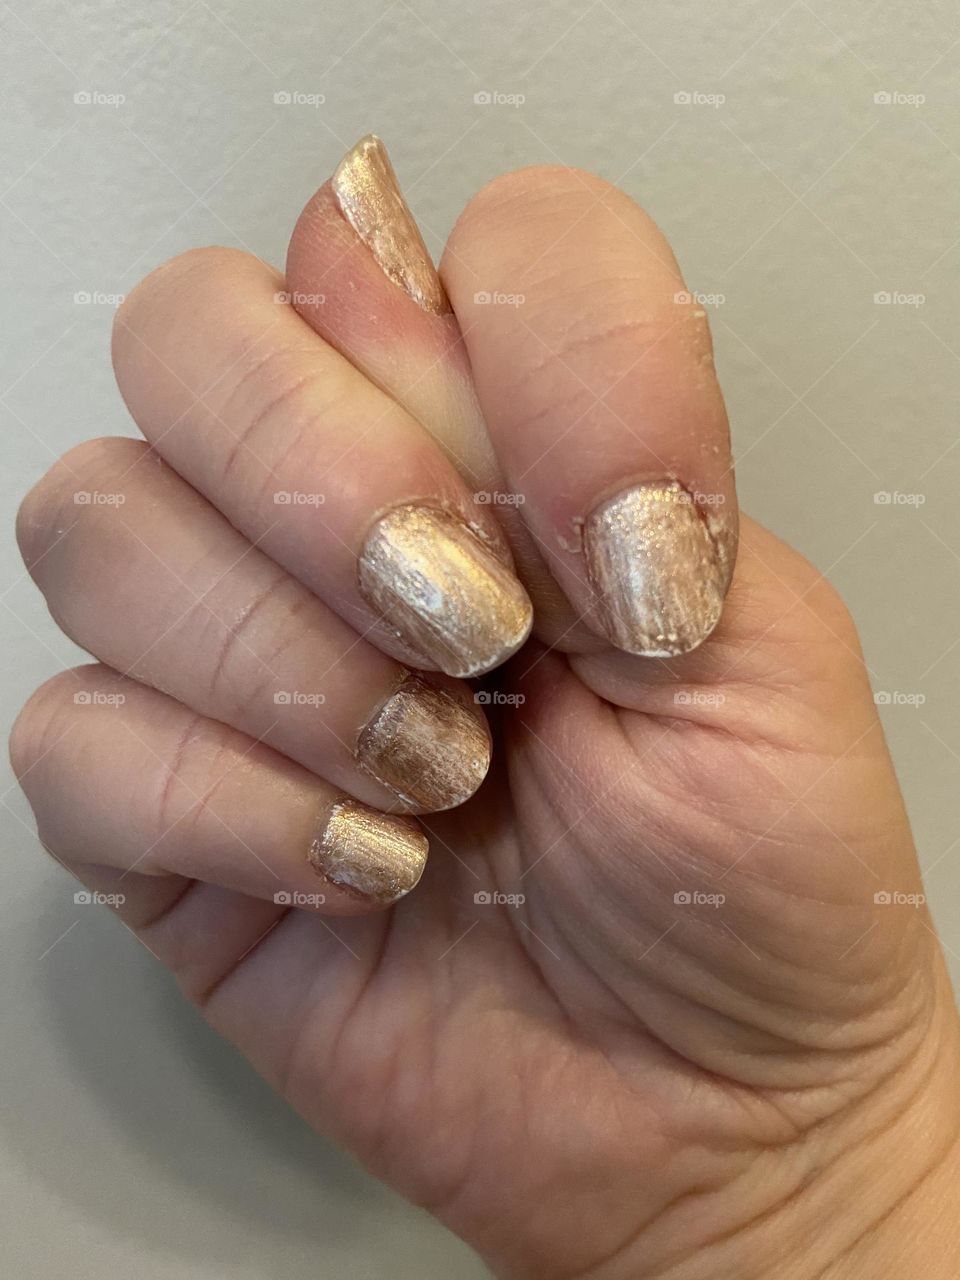 A hand in a fist with the thumb tucked in and peeking out, showing fingernails painted marbled-gold (a layer of white with a gold polish on top) against an off-white wall 